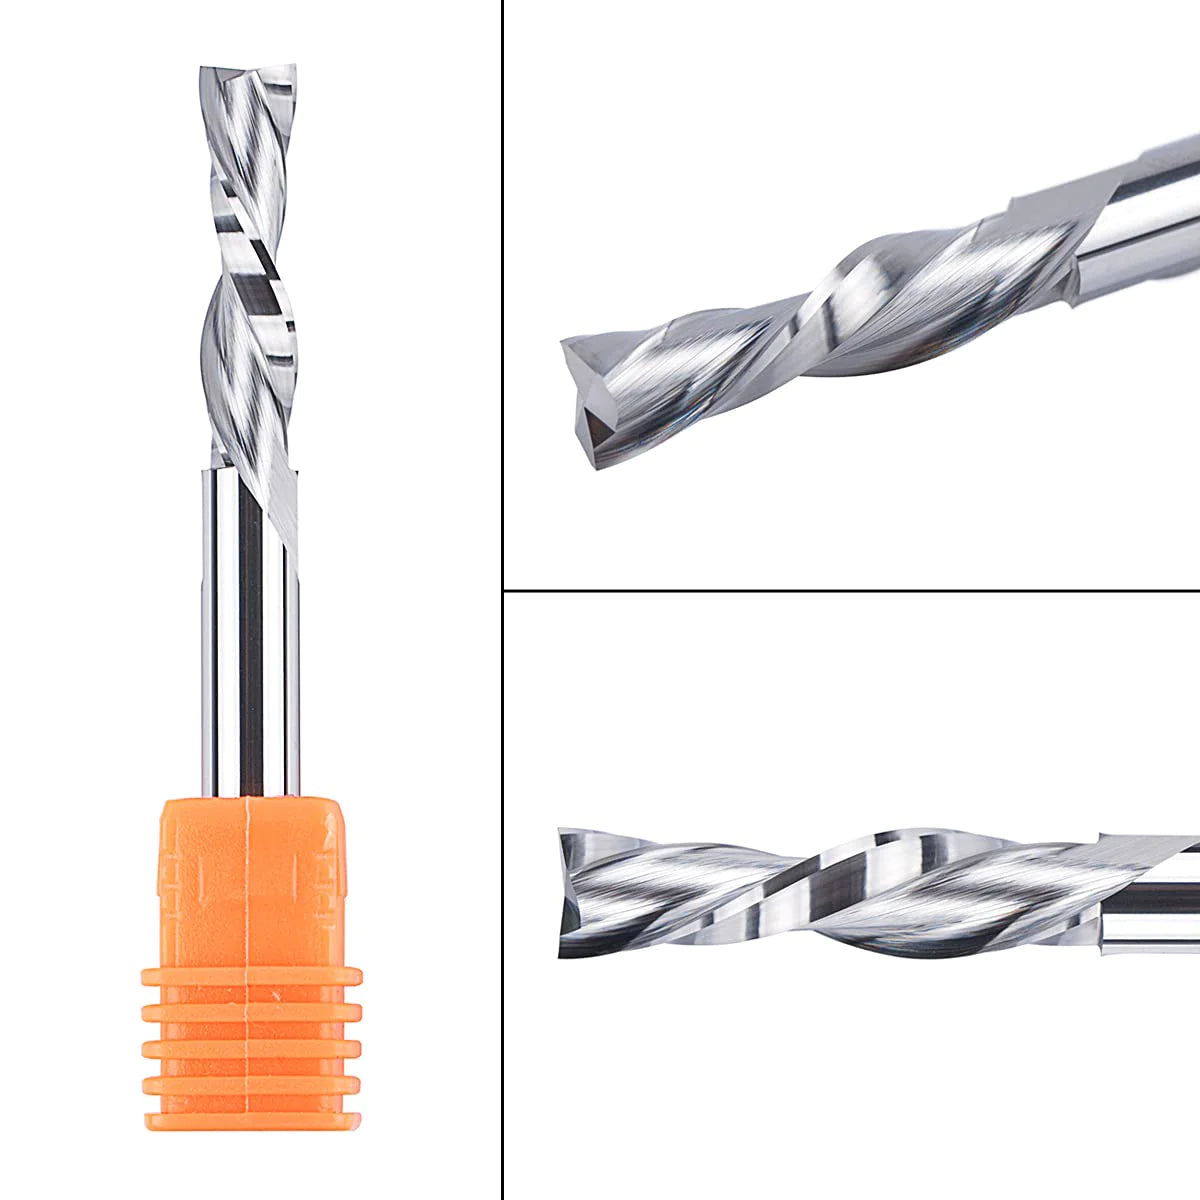 SpeTool UK 6 mm Shank Spiral Router Bit Down Cut End Mill 6 mm Cutting Diameter 24 mm Cutting Length 60 mm Total Length HRC55 Solid Carbide CNC Router Bits for Wood Carving Woodworking